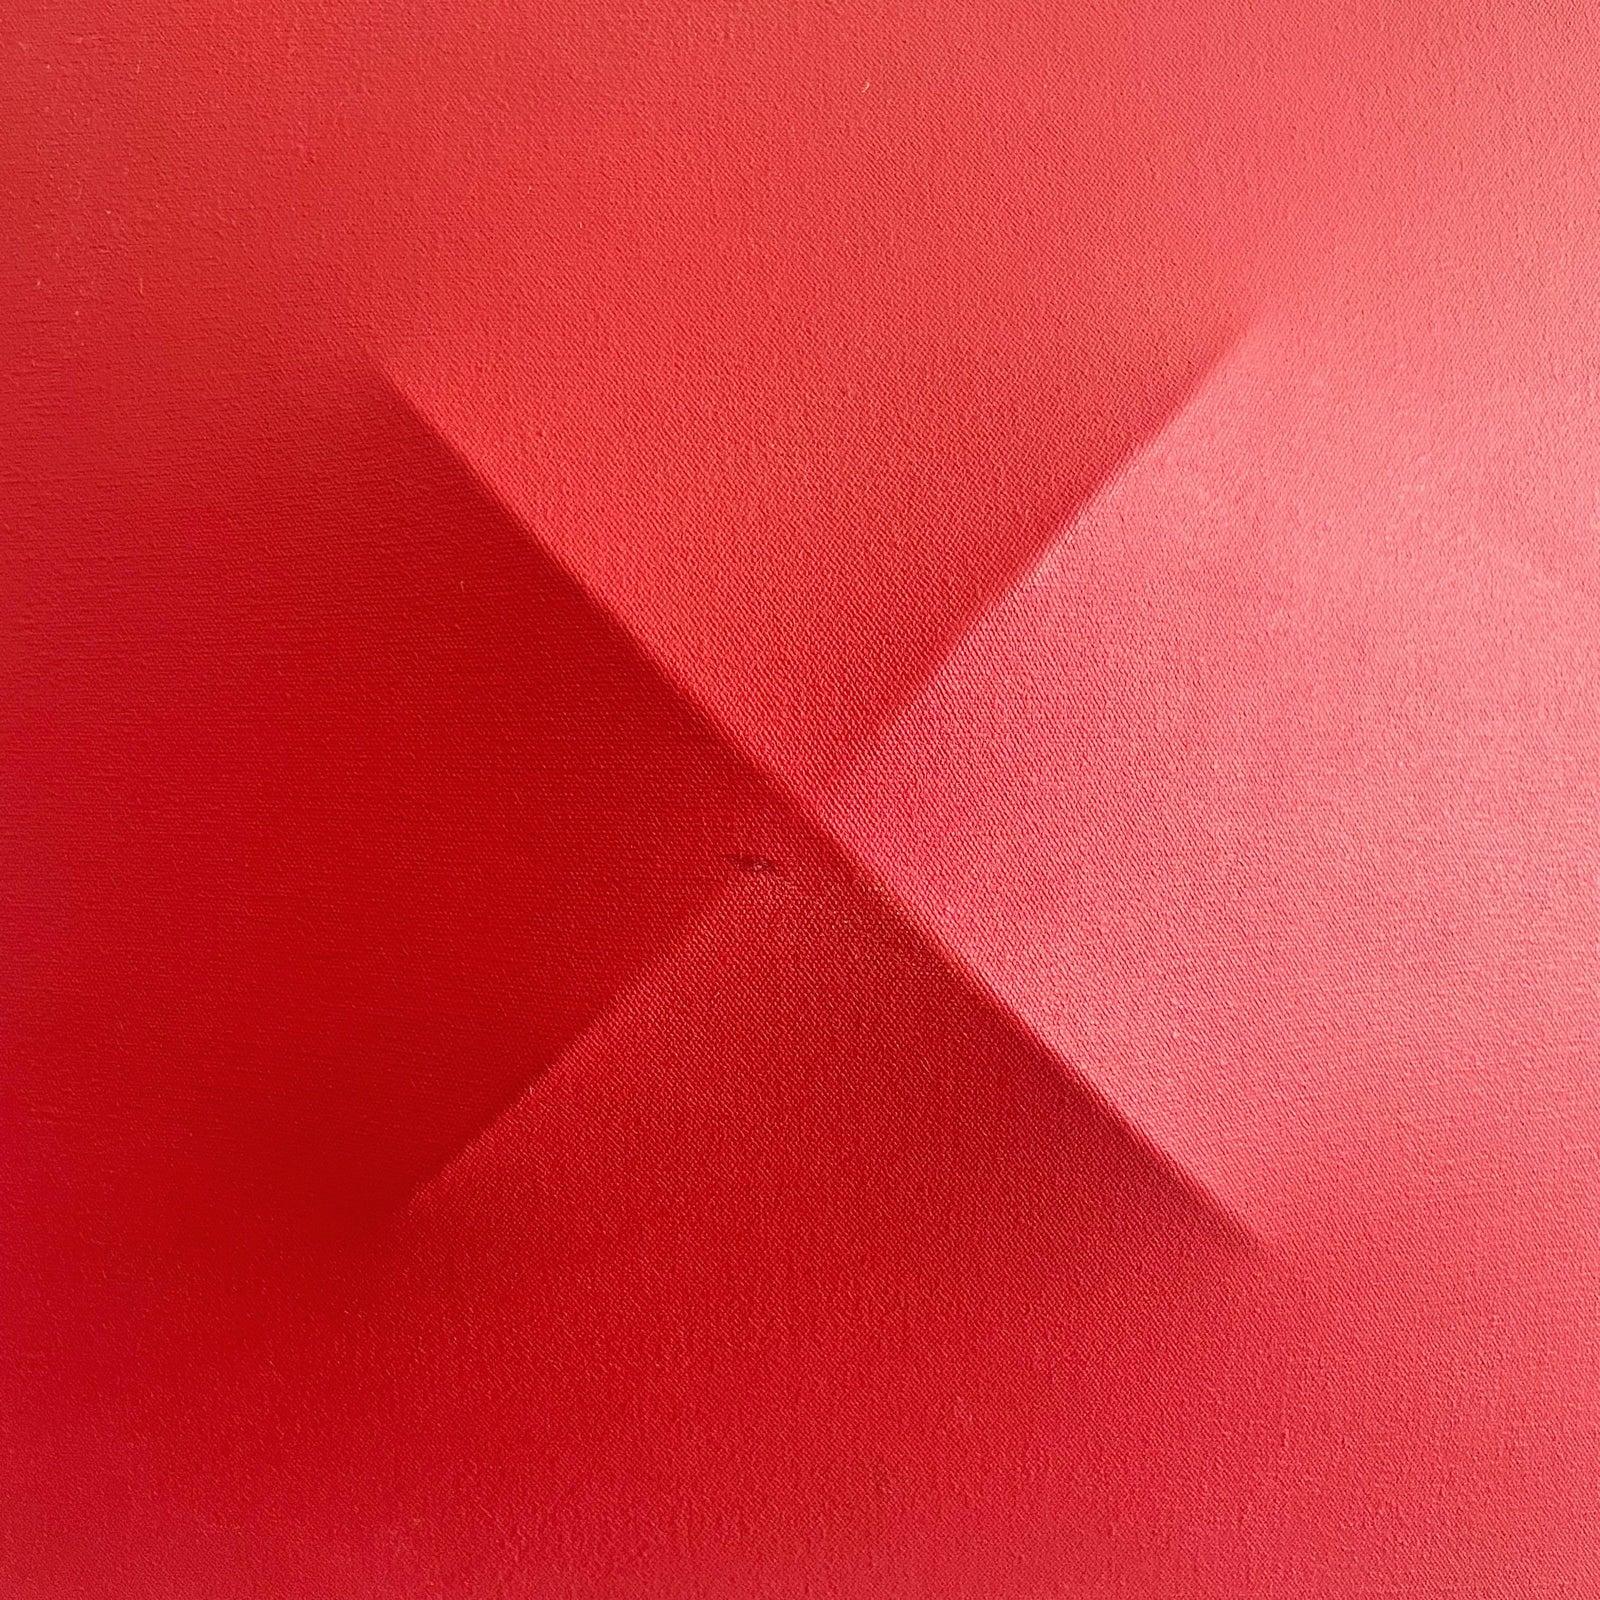 American Tom Scmitt 1968 Shaped Canvas 3 Dimensional Acrylic on Canvas in Red For Sale